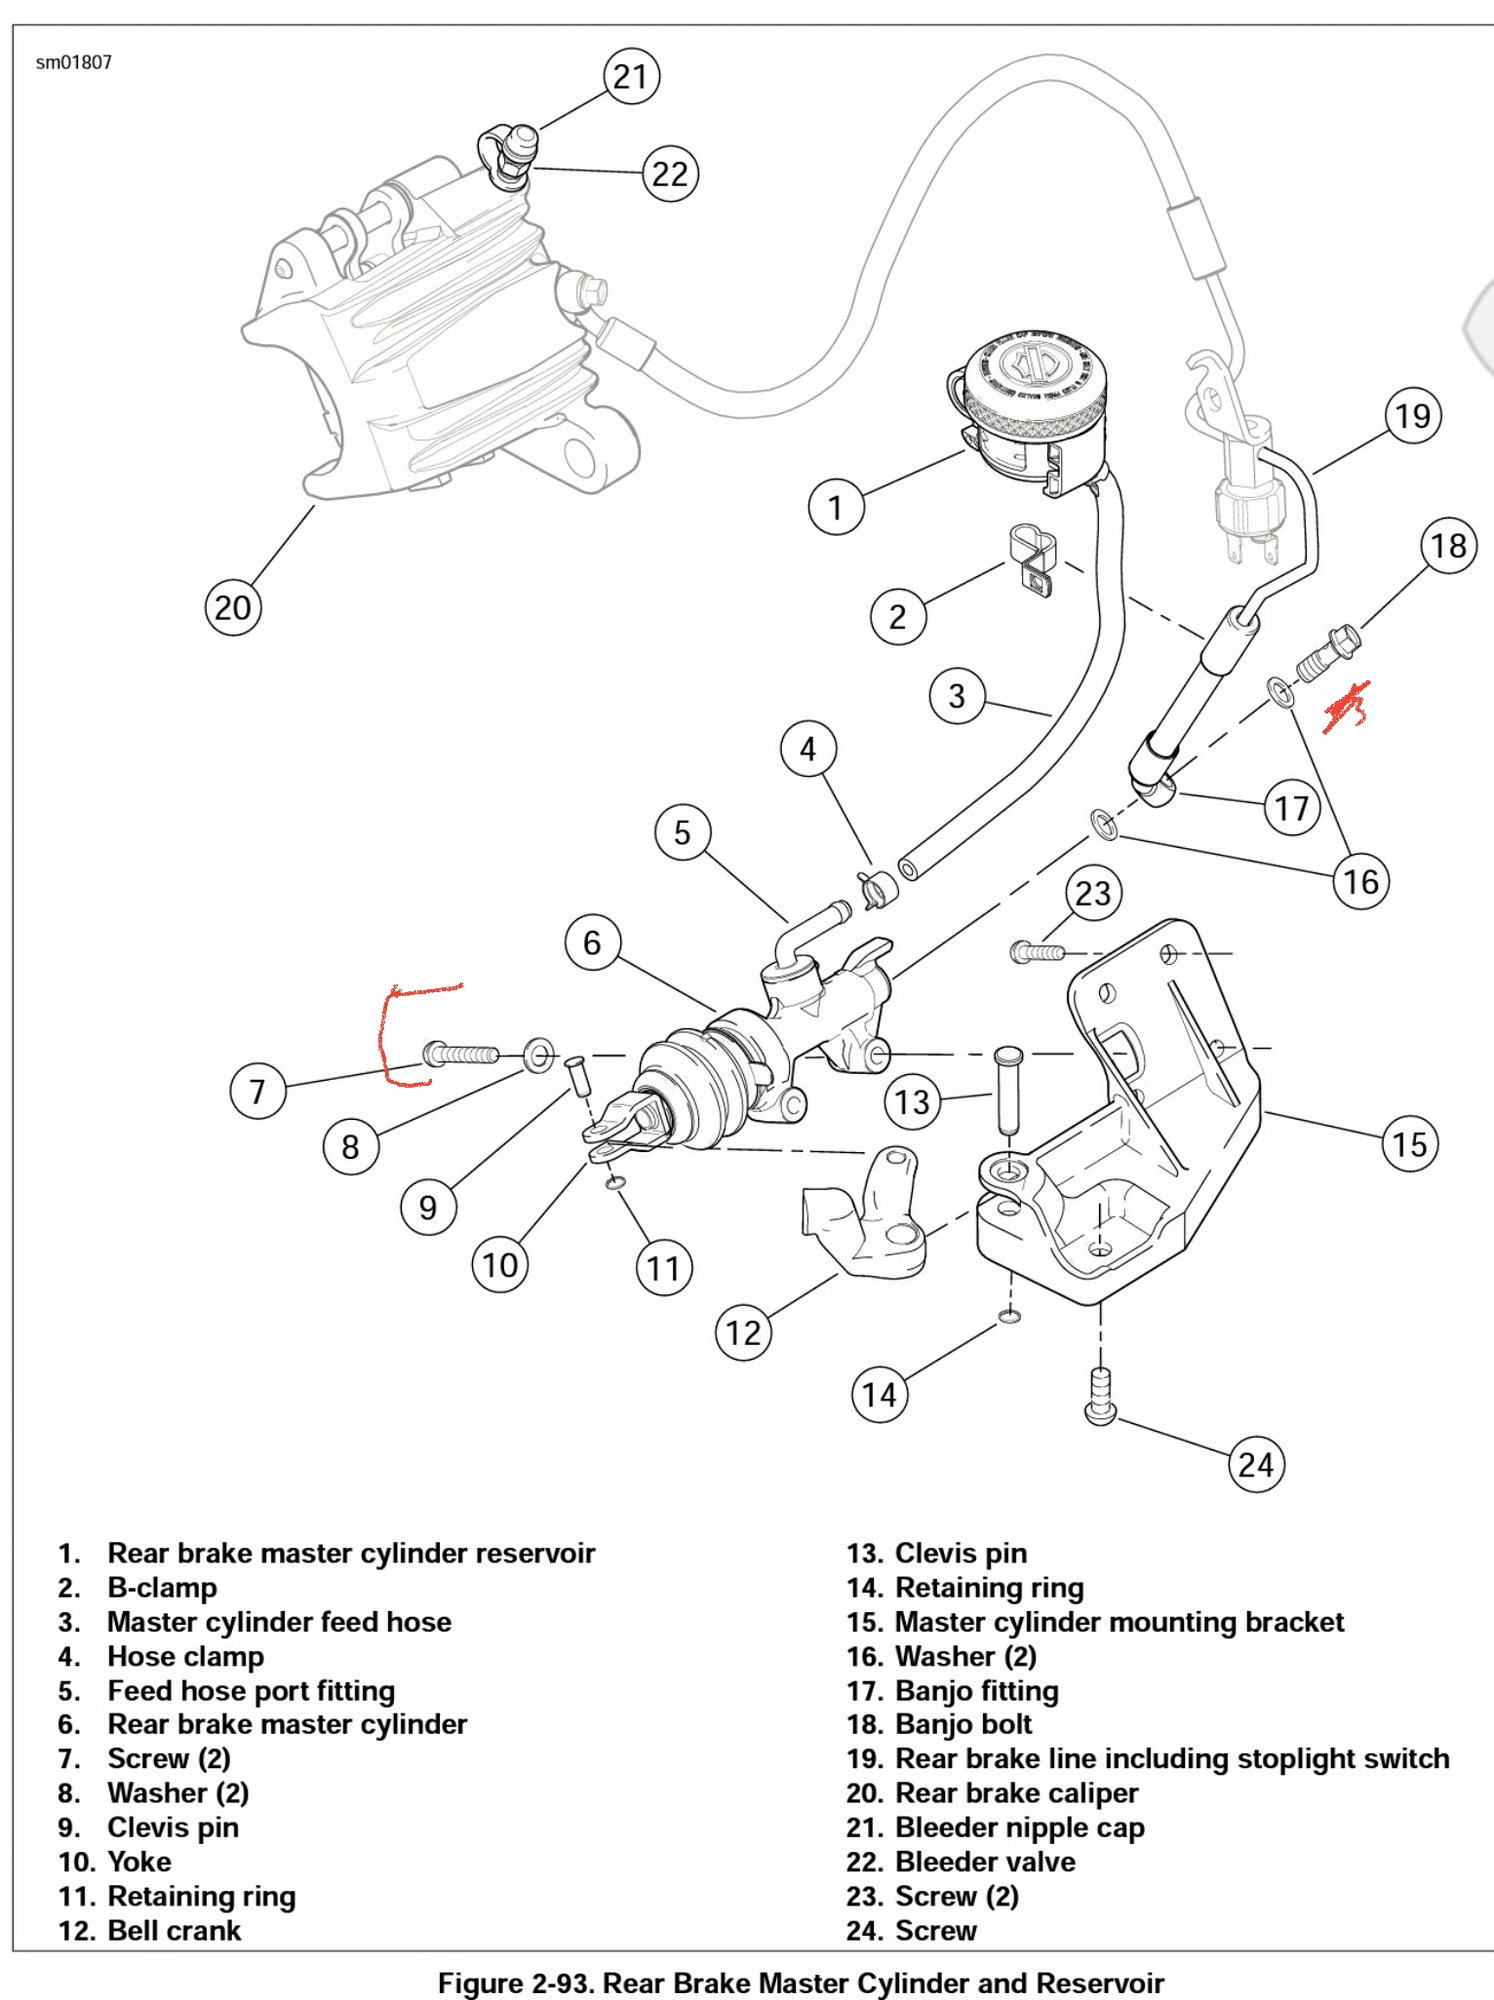 replace master cylinder rear axle - Harley Davidson Forums